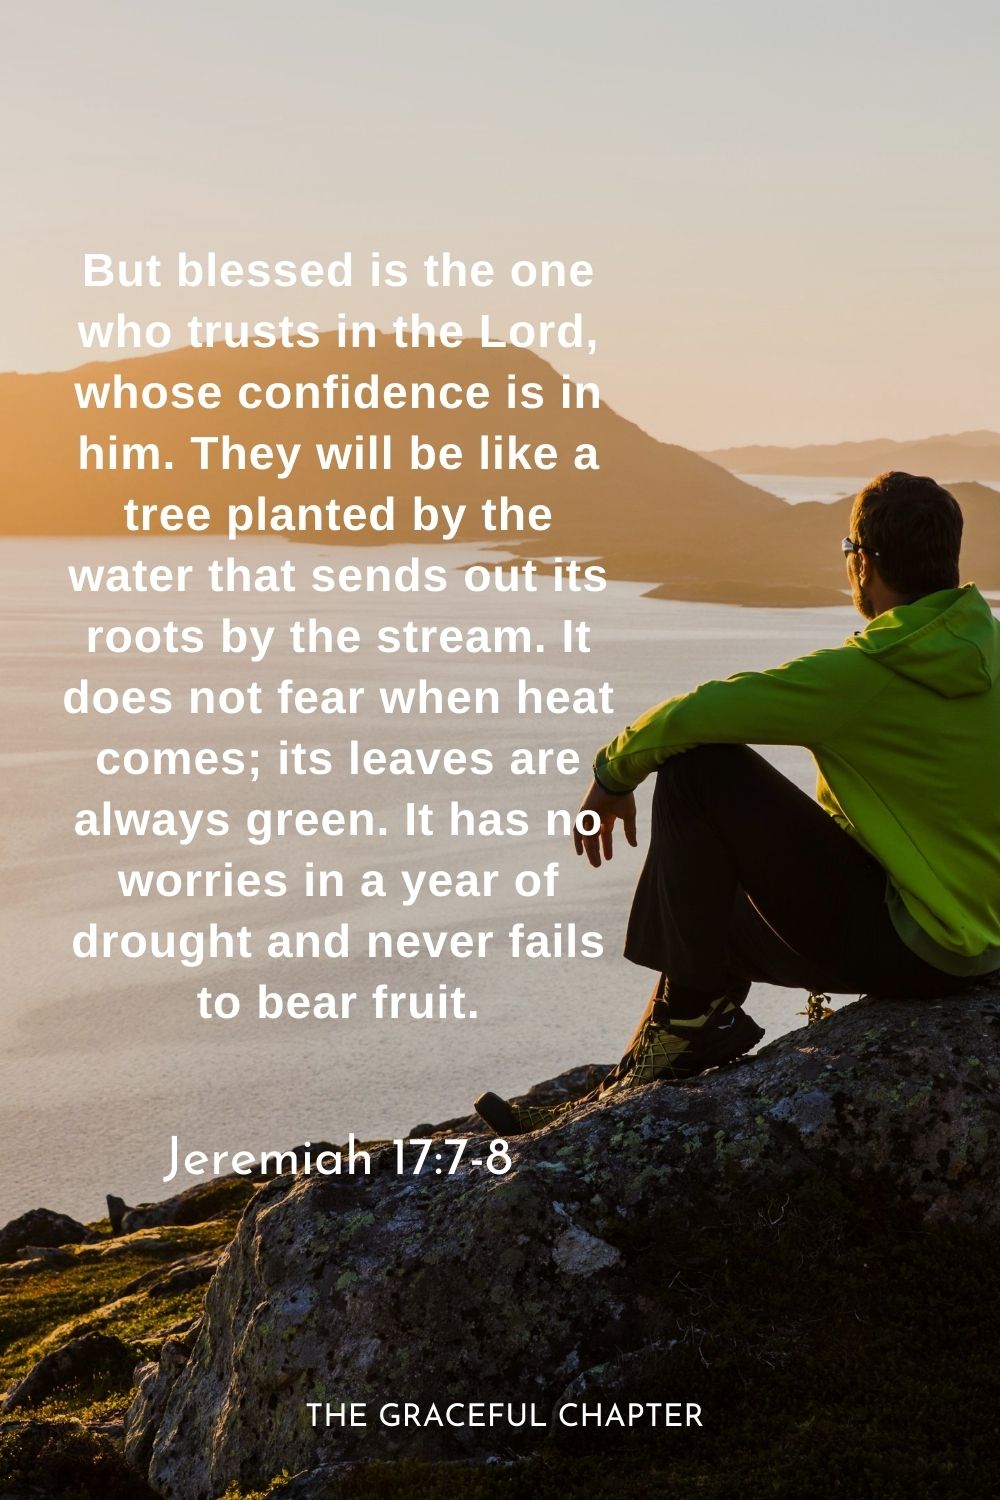 But blessed is the one who trusts in the Lord, whose confidence is in him. They will be like a tree planted by the water that sends out its roots by the stream. It does not fear when heat comes; its leaves are always green. It has no worries in a year of drought and never fails to bear fruit.